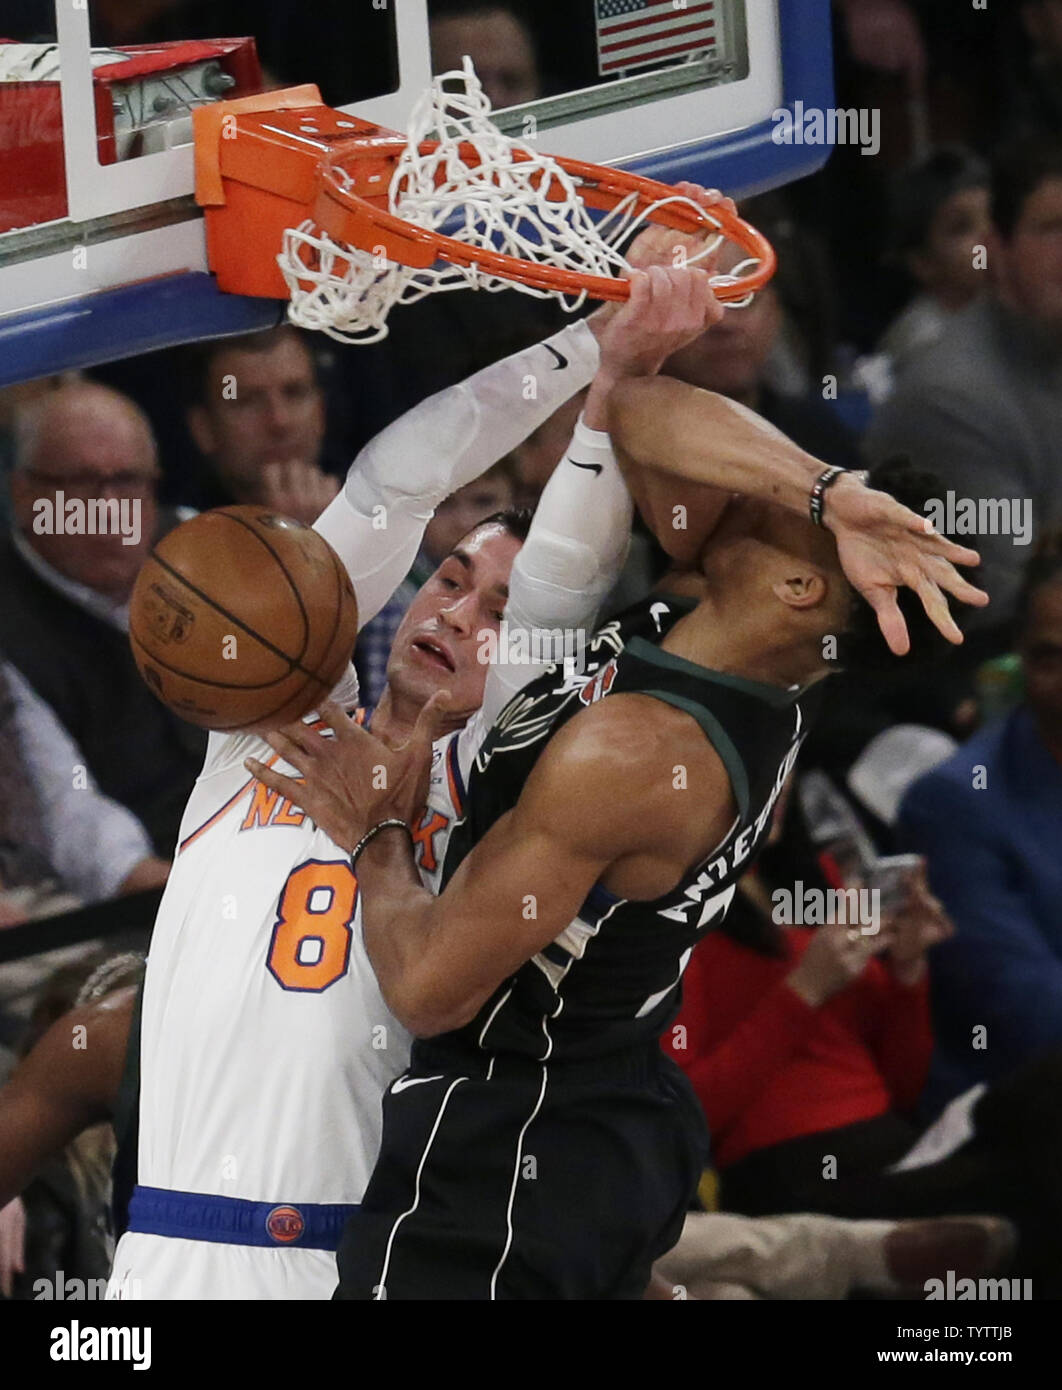 New York Knicks Mario Hezonja dunks the ball over Milwaukee Bucks Giannis  Antetokounmpo in the first quarter at Madison Square Garden in New York  City on December 1, 2018. The Knicks defeated